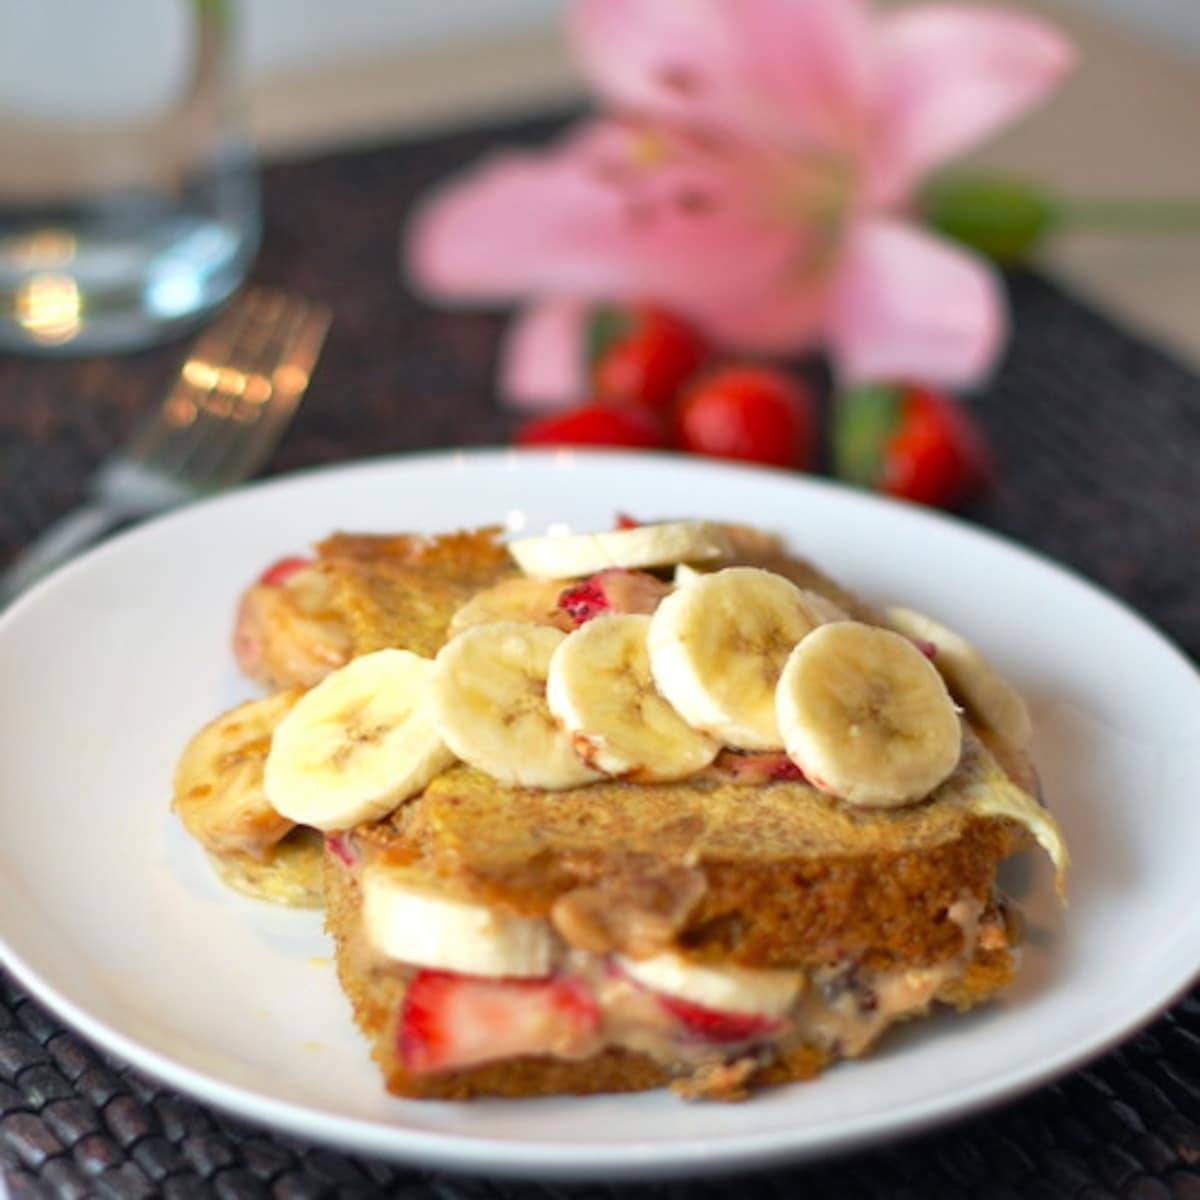 Stuffed French Toast with strawberries, bananas, and maple syrup on a plate.